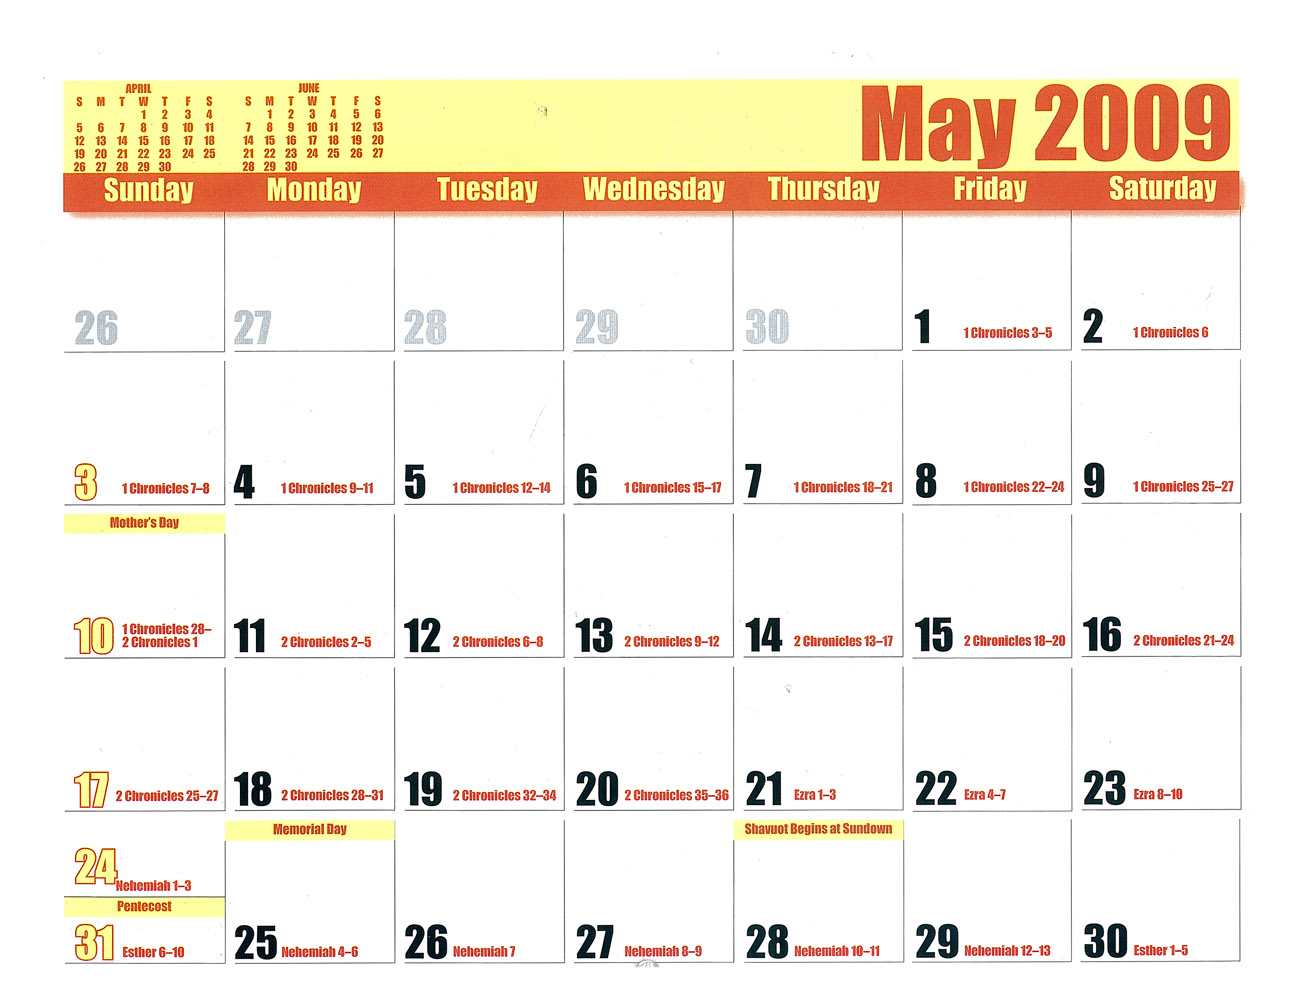 2009 Prophecy Calendar: May - alignment of nations